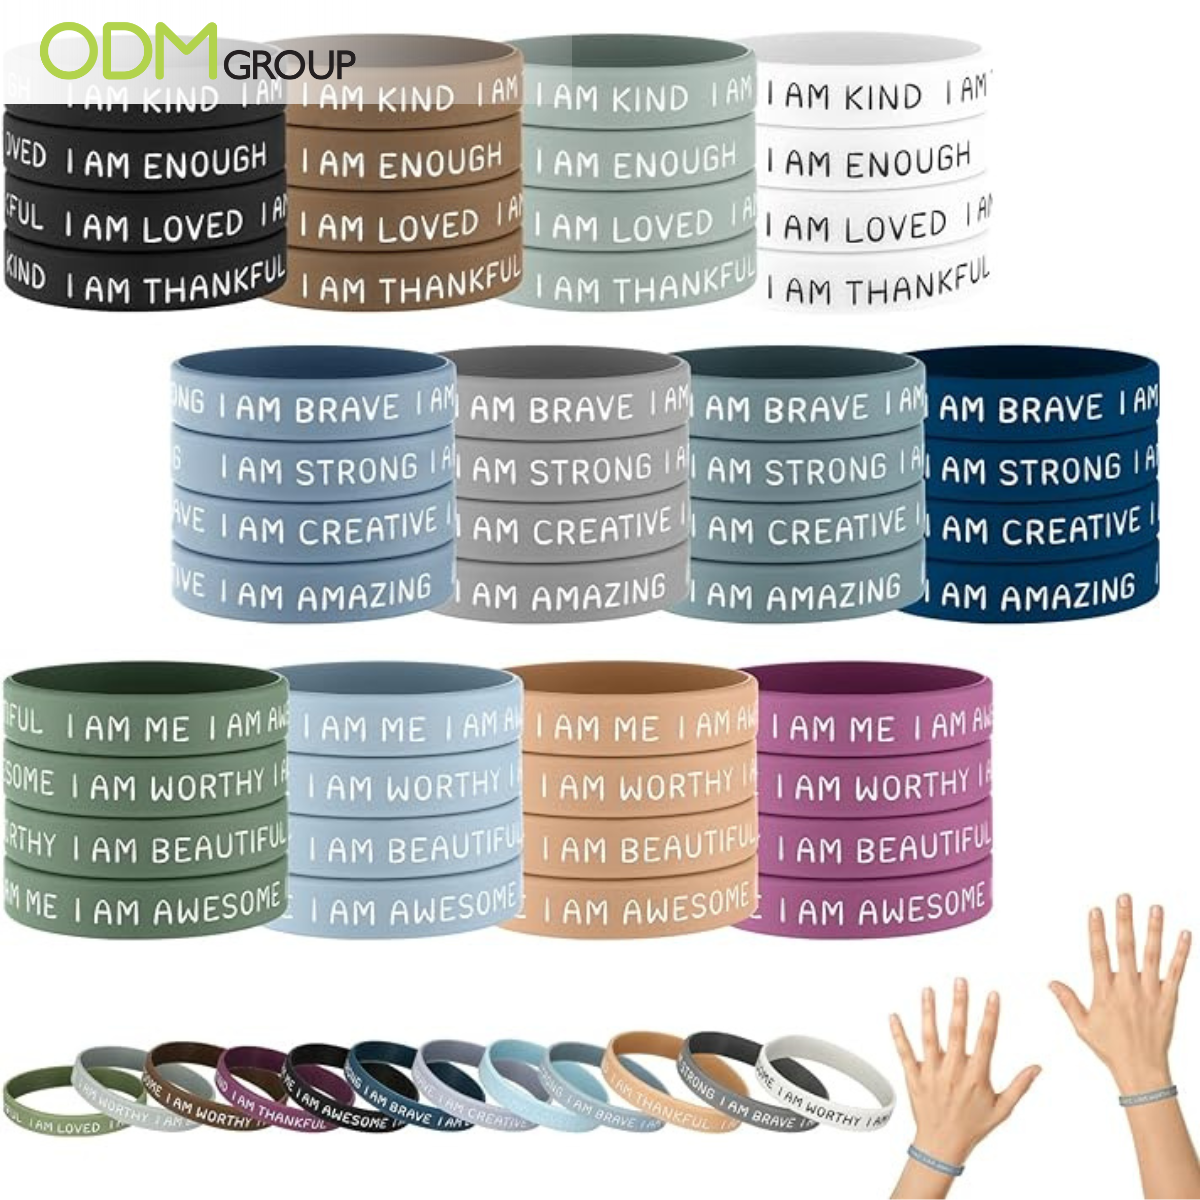 A collection of colorful wristbands with positive affirmations like "I am brave," "I am enough," and "I am kind."